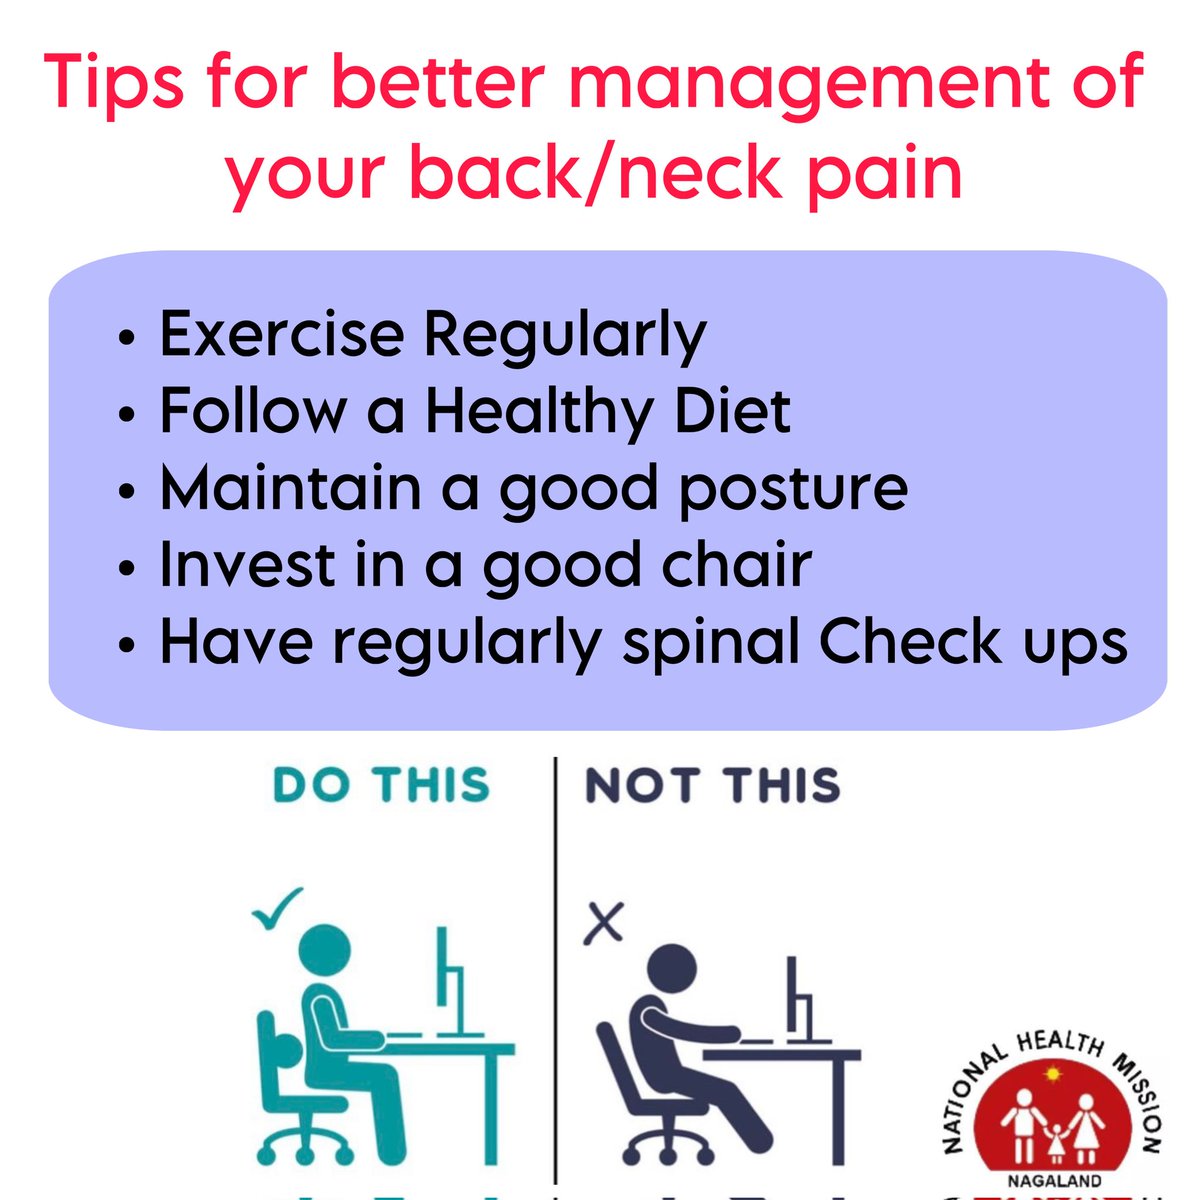 Your Spine is a gateway to good health. Ignoring back pain is not a solution, Consult an expert and get it treated!! #HealthyLifeStyle #Prevention